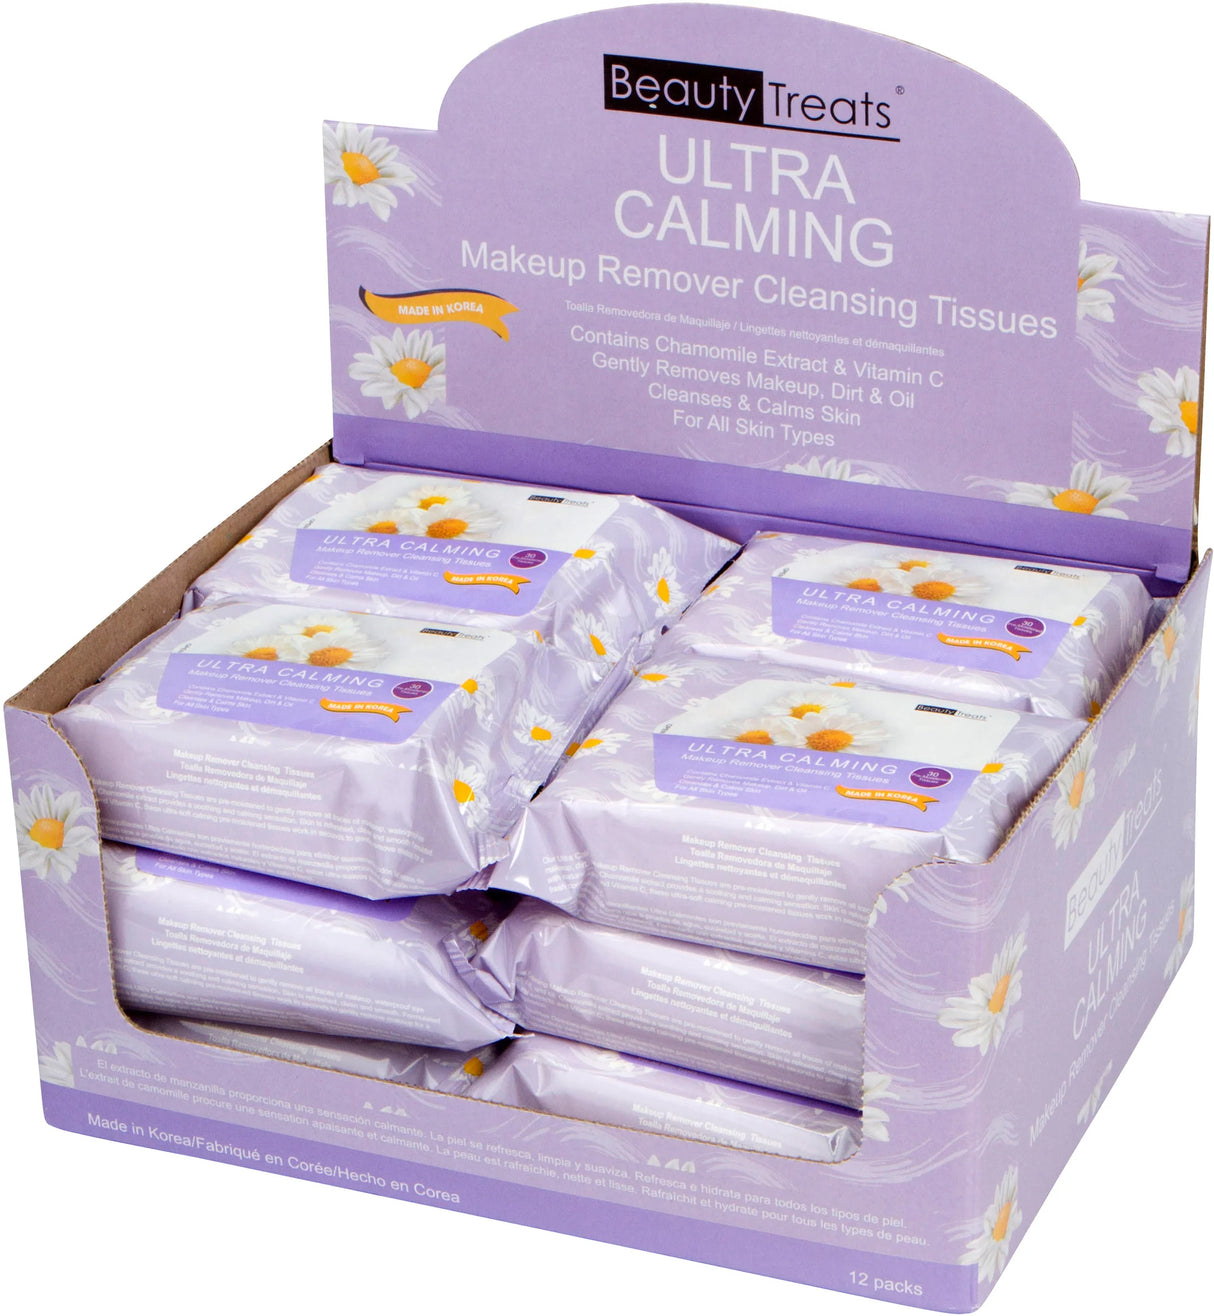 Beauty Treats® Ultra Calming Makeup Remover Cleansing Tissues